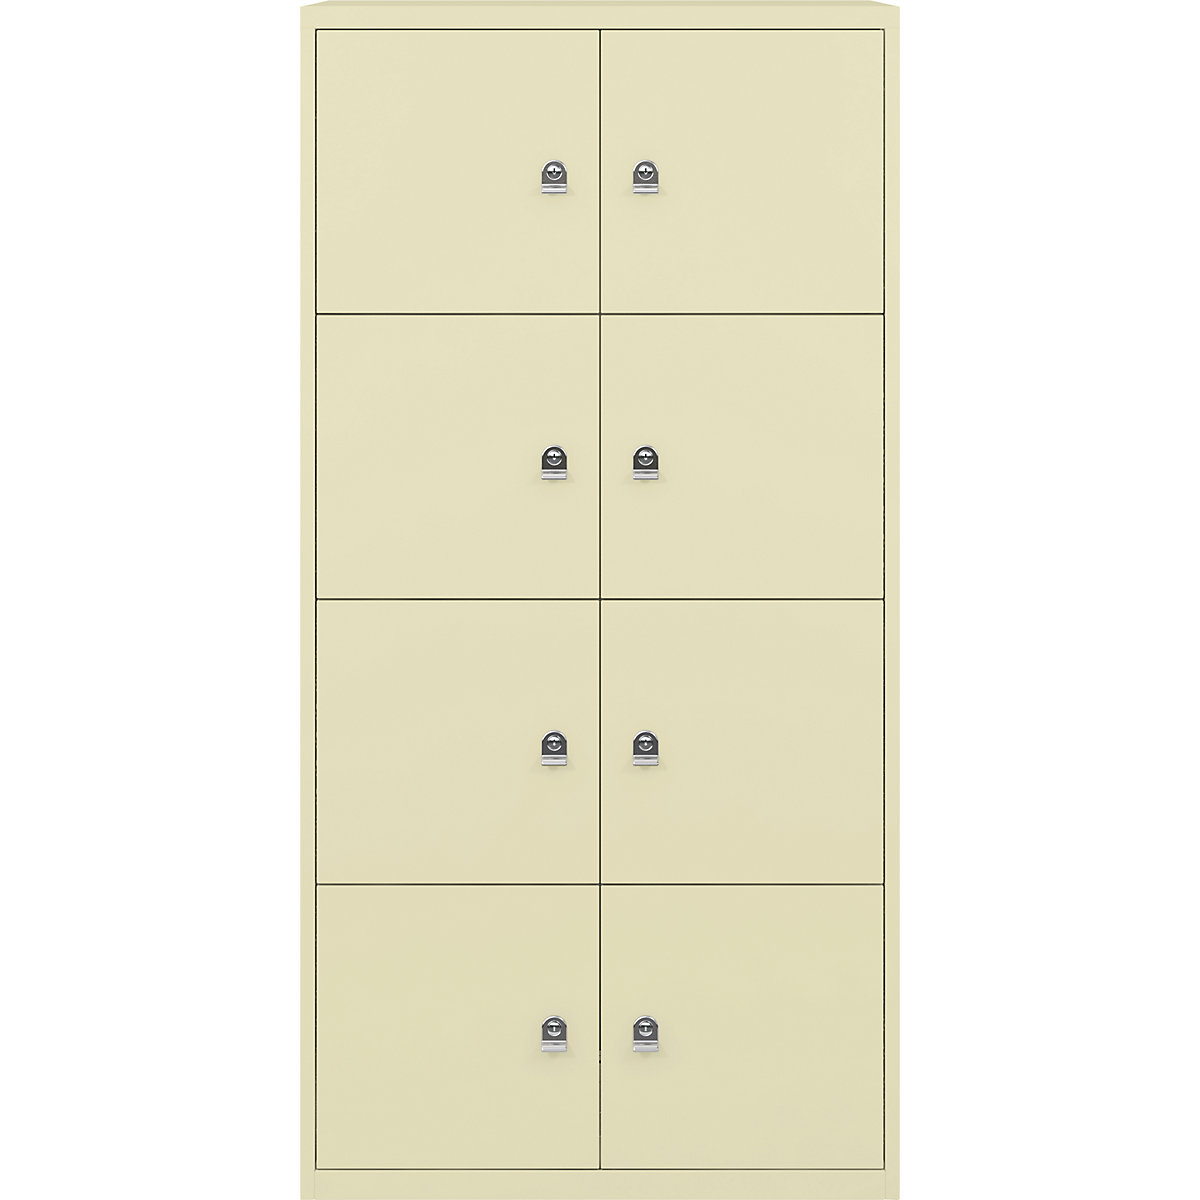 BISLEY – LateralFile™ lodge, with 8 lockable compartments, height 375 mm each, cream